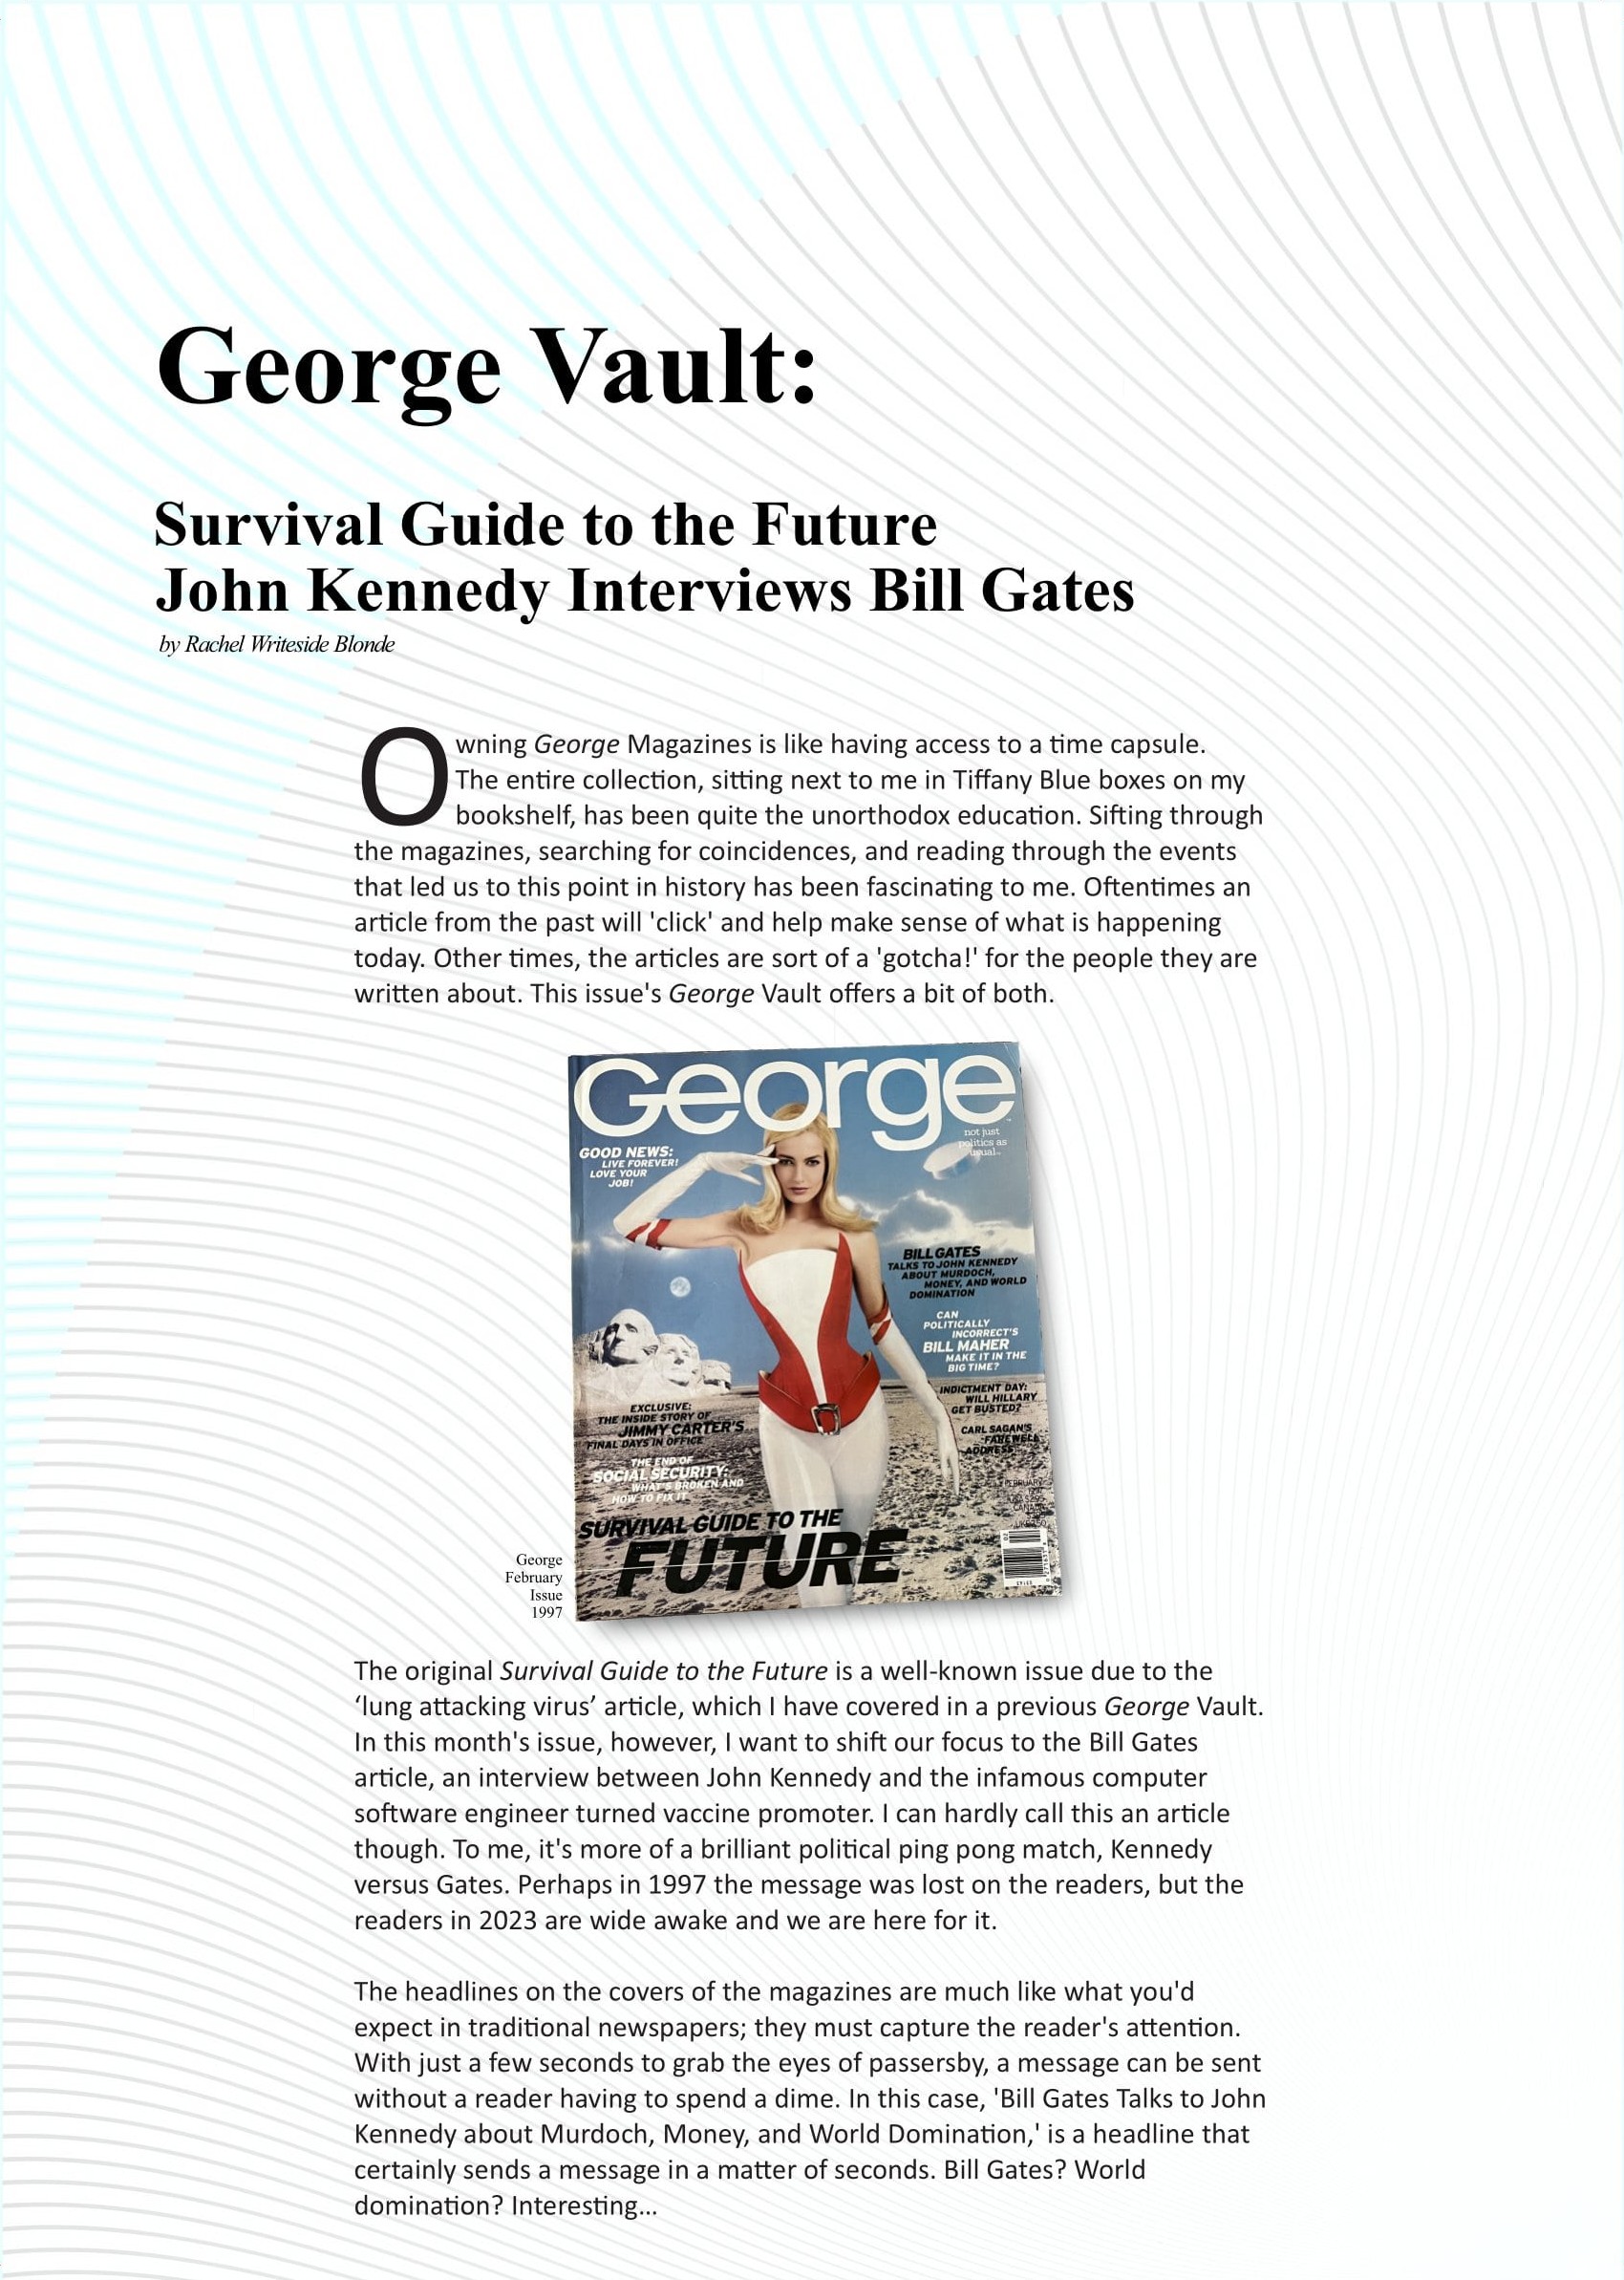 George Vault: John Kennedy Interviews Bill Gates in the ‘Survival Guide to the Future’ from 1997  at george magazine